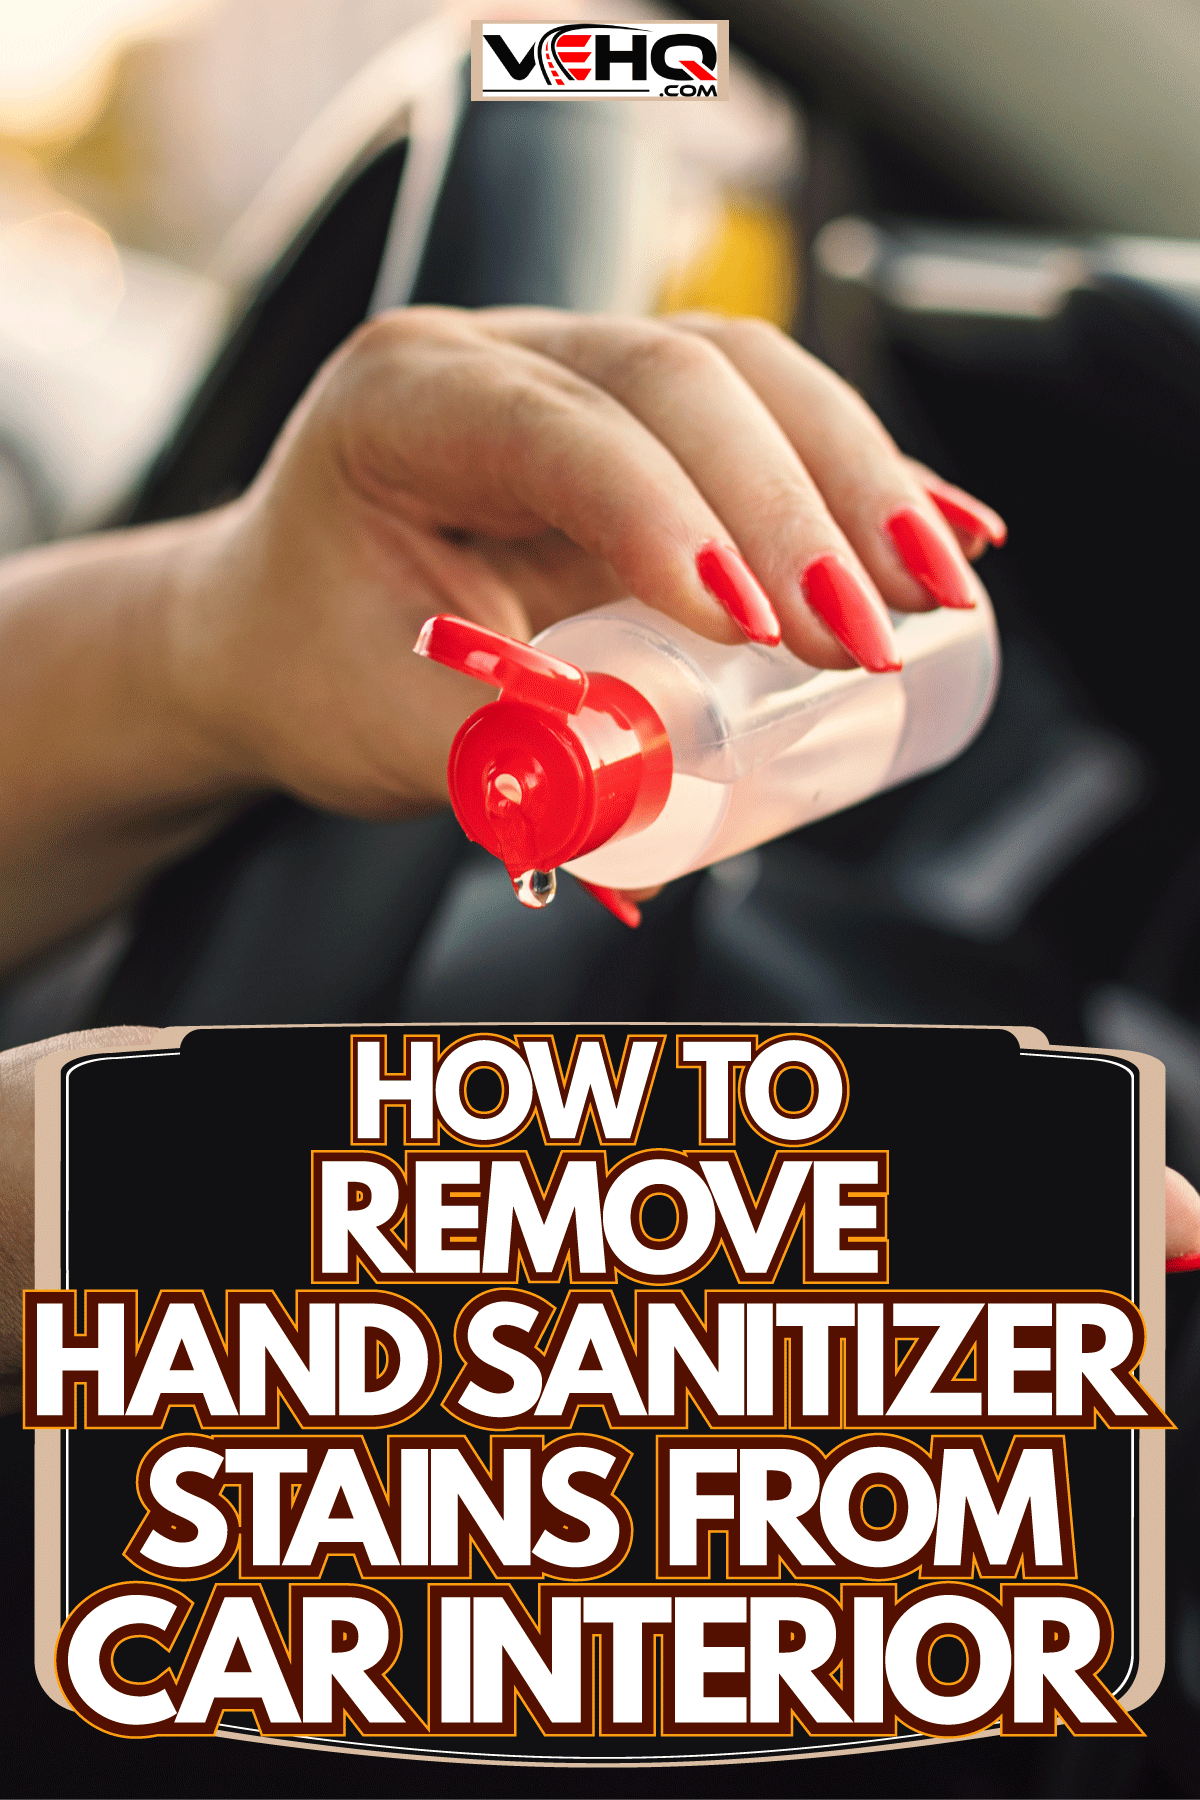 Woman pouring a small amount of hand sanitizer, How To Remove Hand Sanitizer Stains From Car Interior